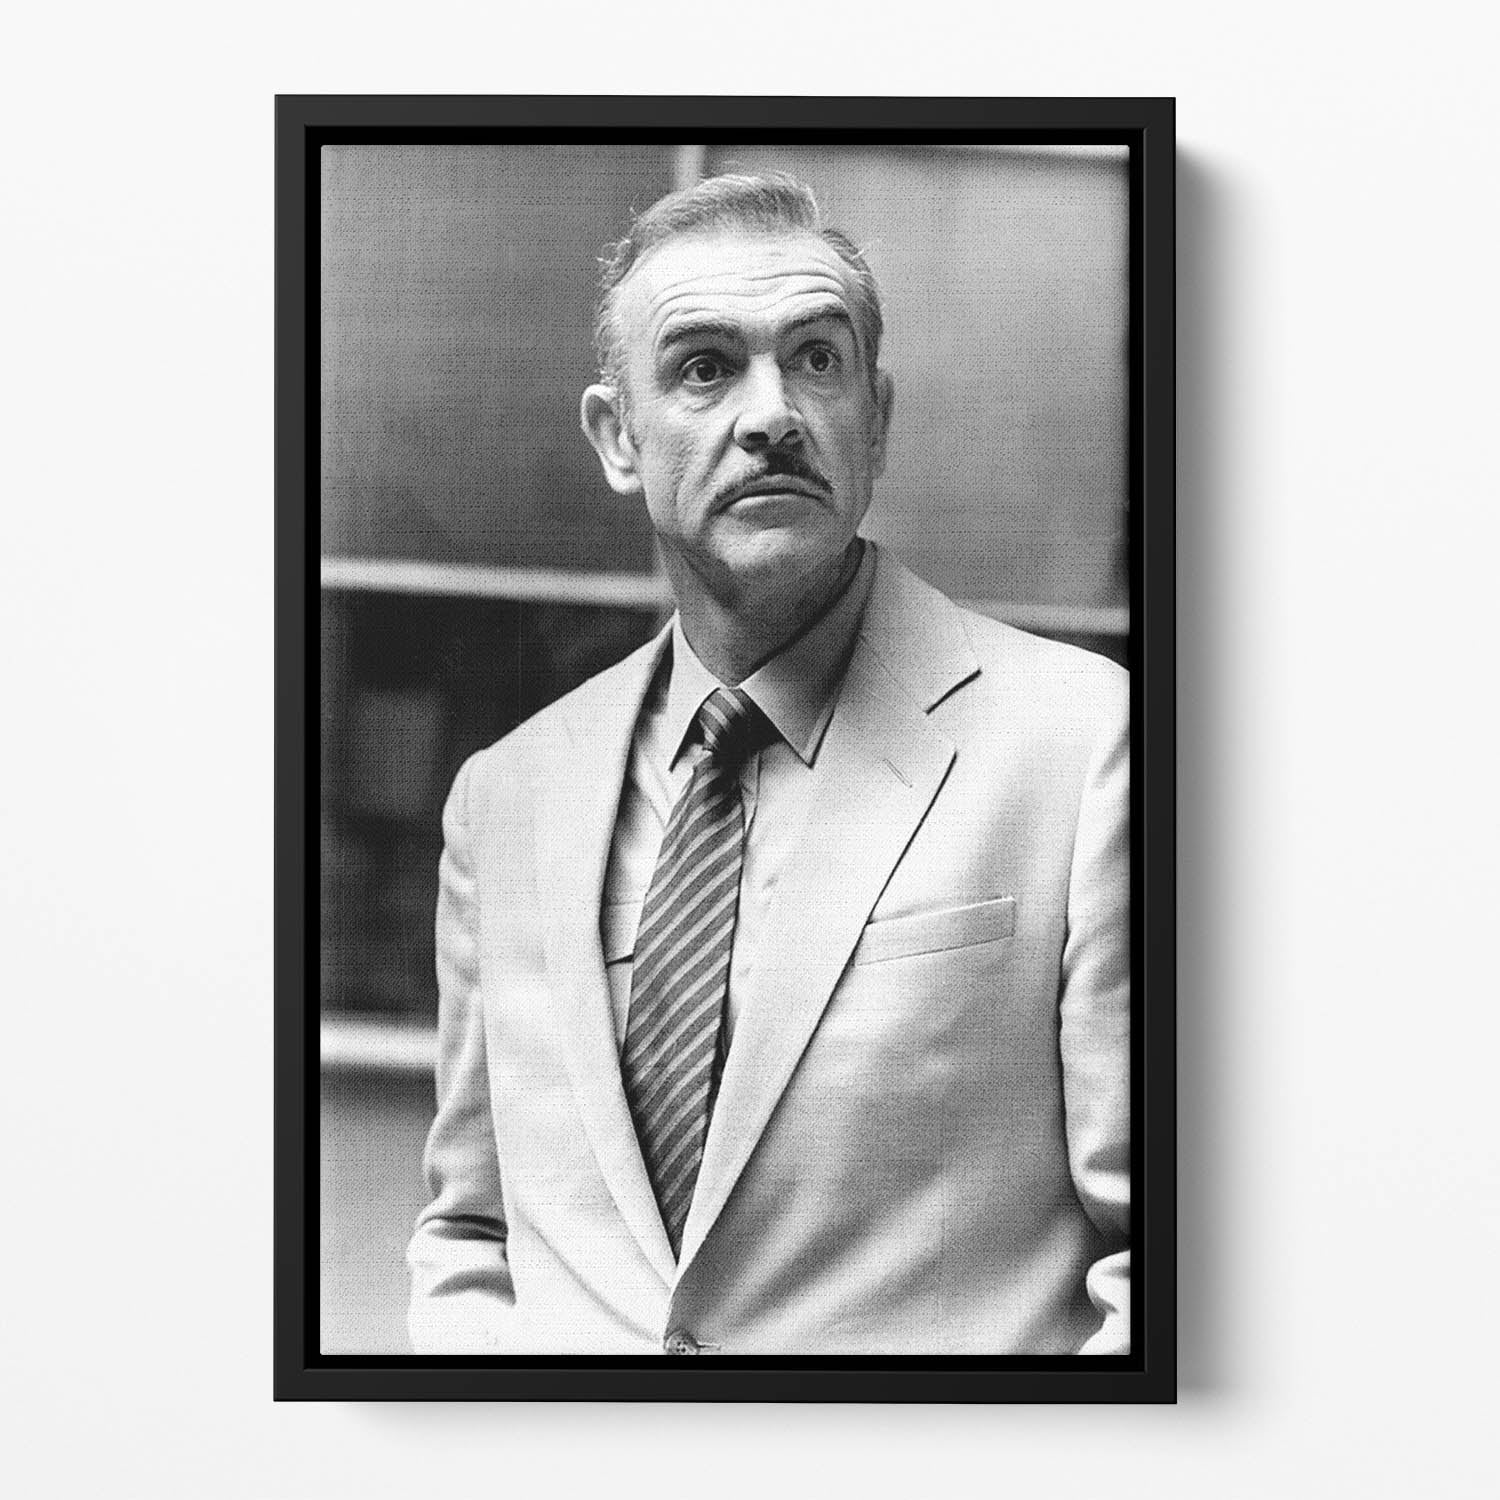 Sean Connery in 1978 Floating Framed Canvas